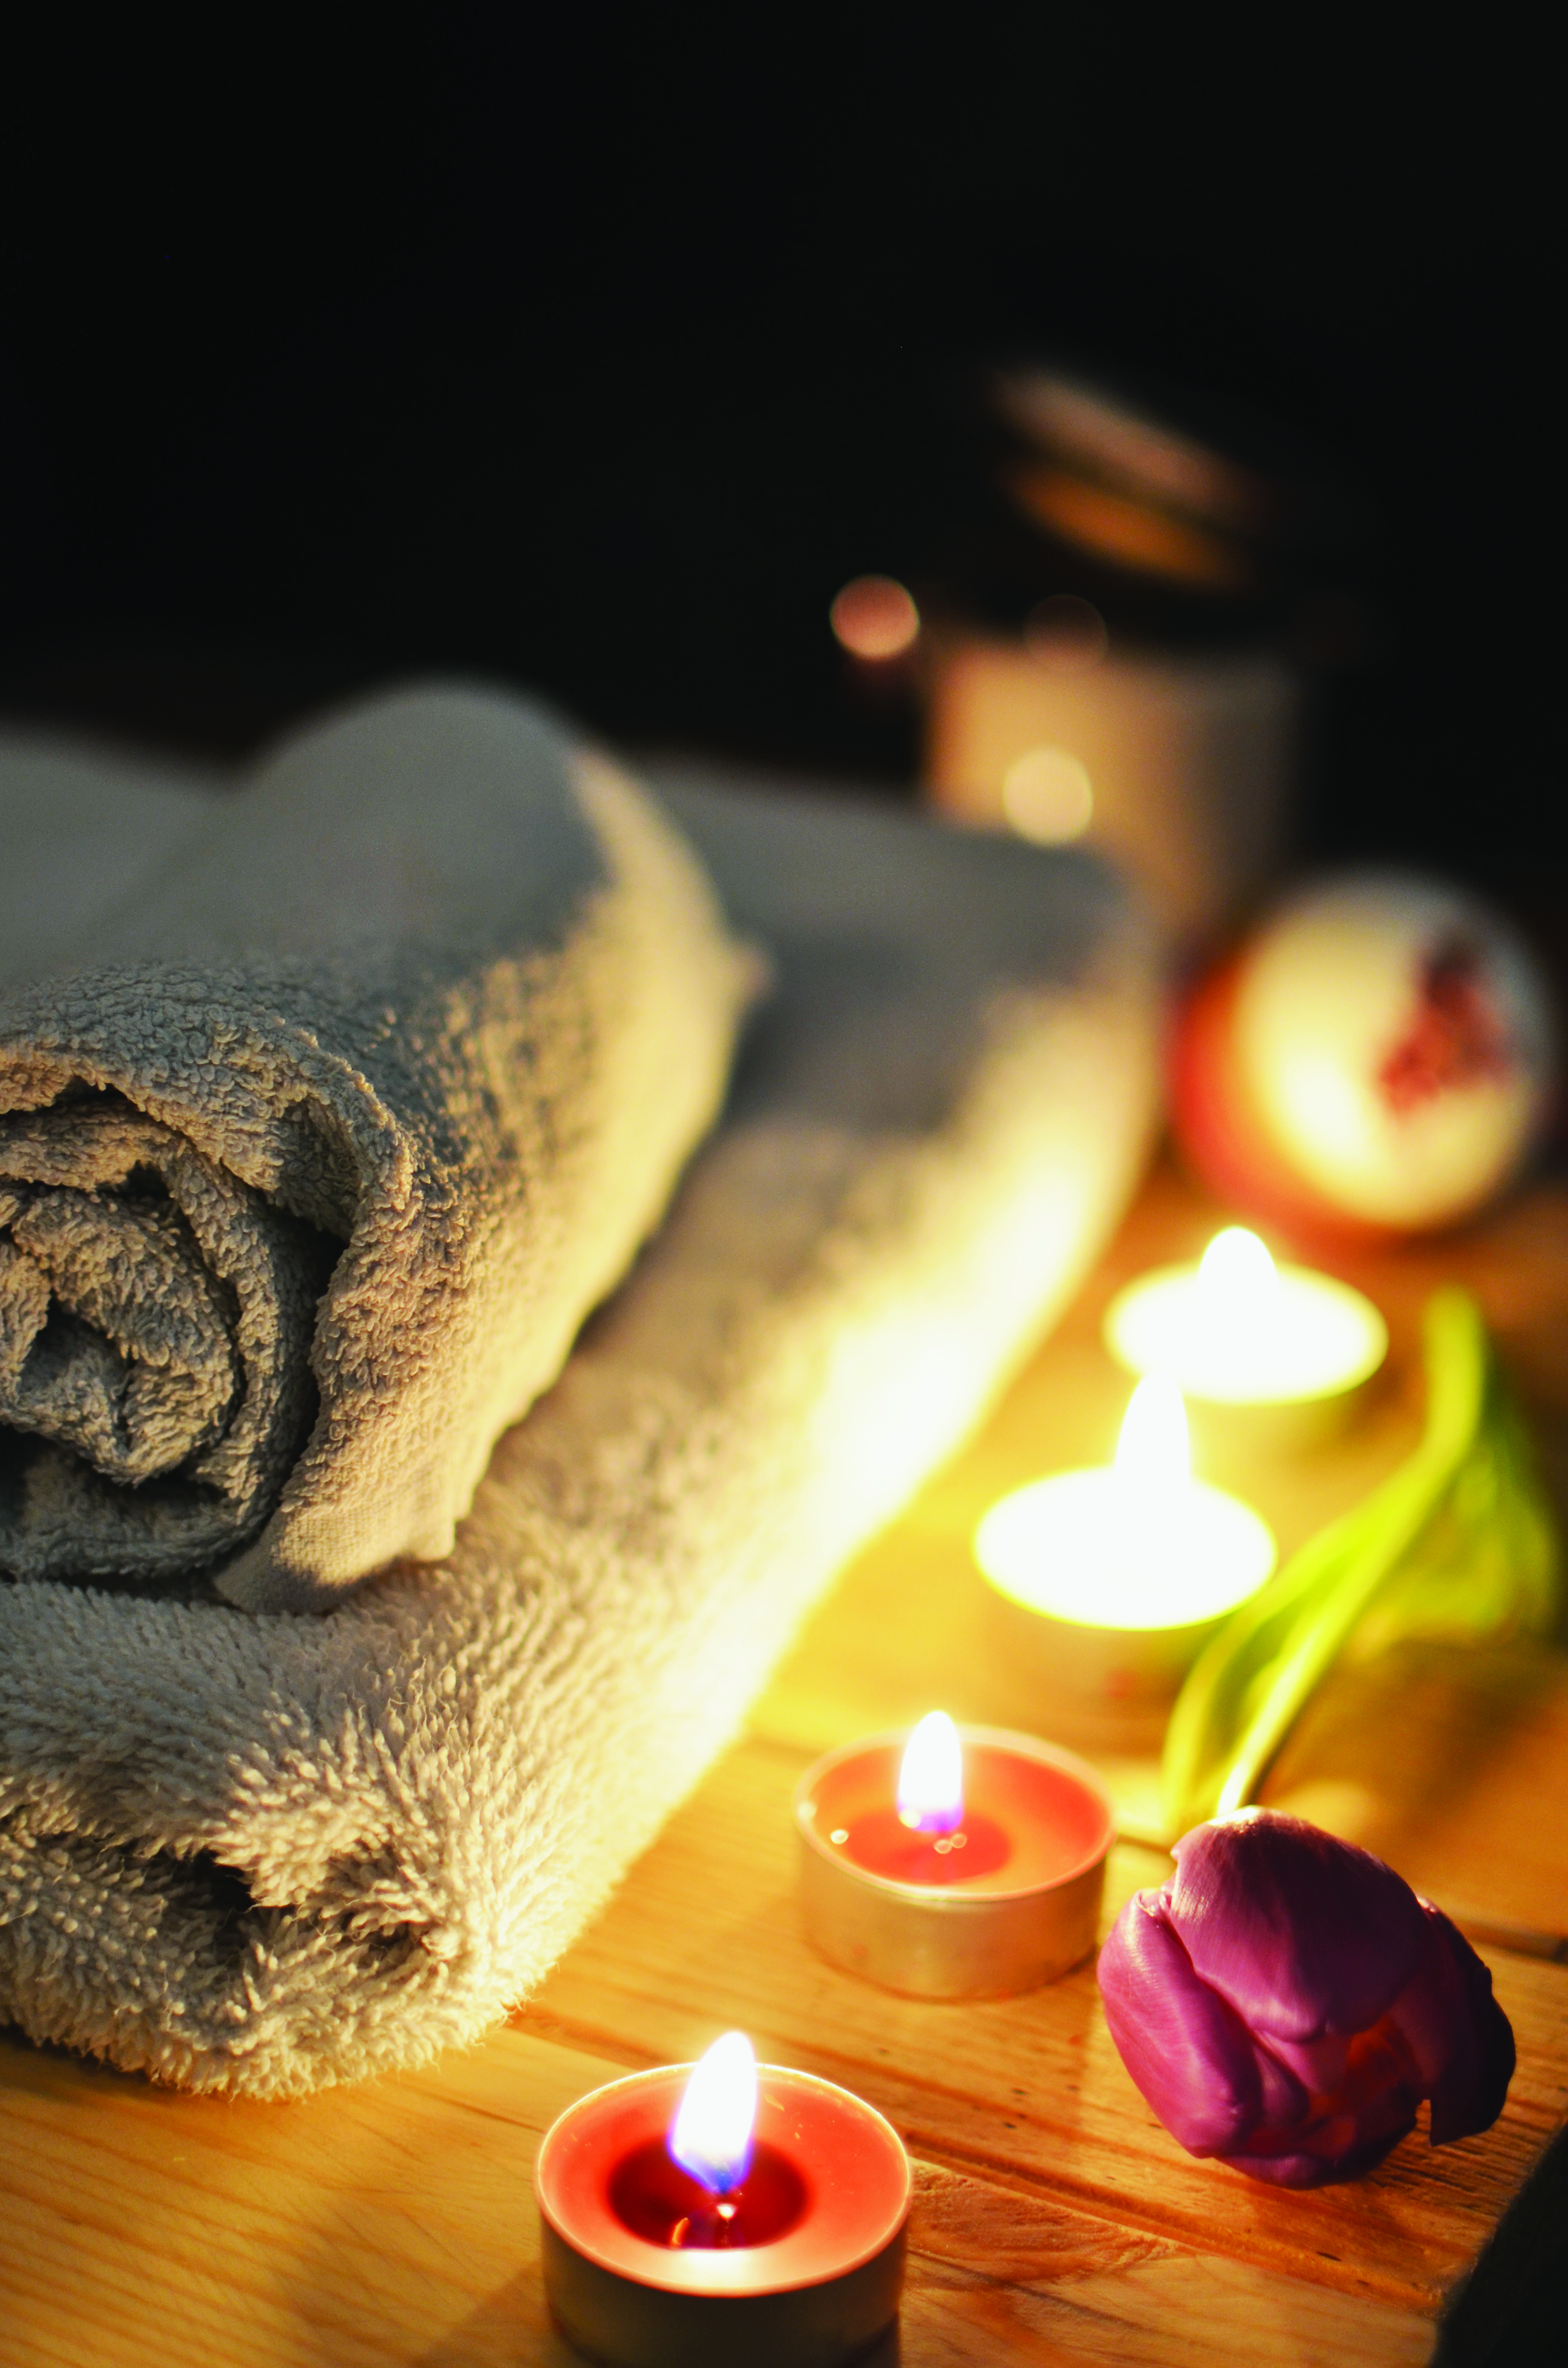 Image of Towel, Flower and Lit Candles for Spa Treatments at Badwell Ash Holiday Lodges